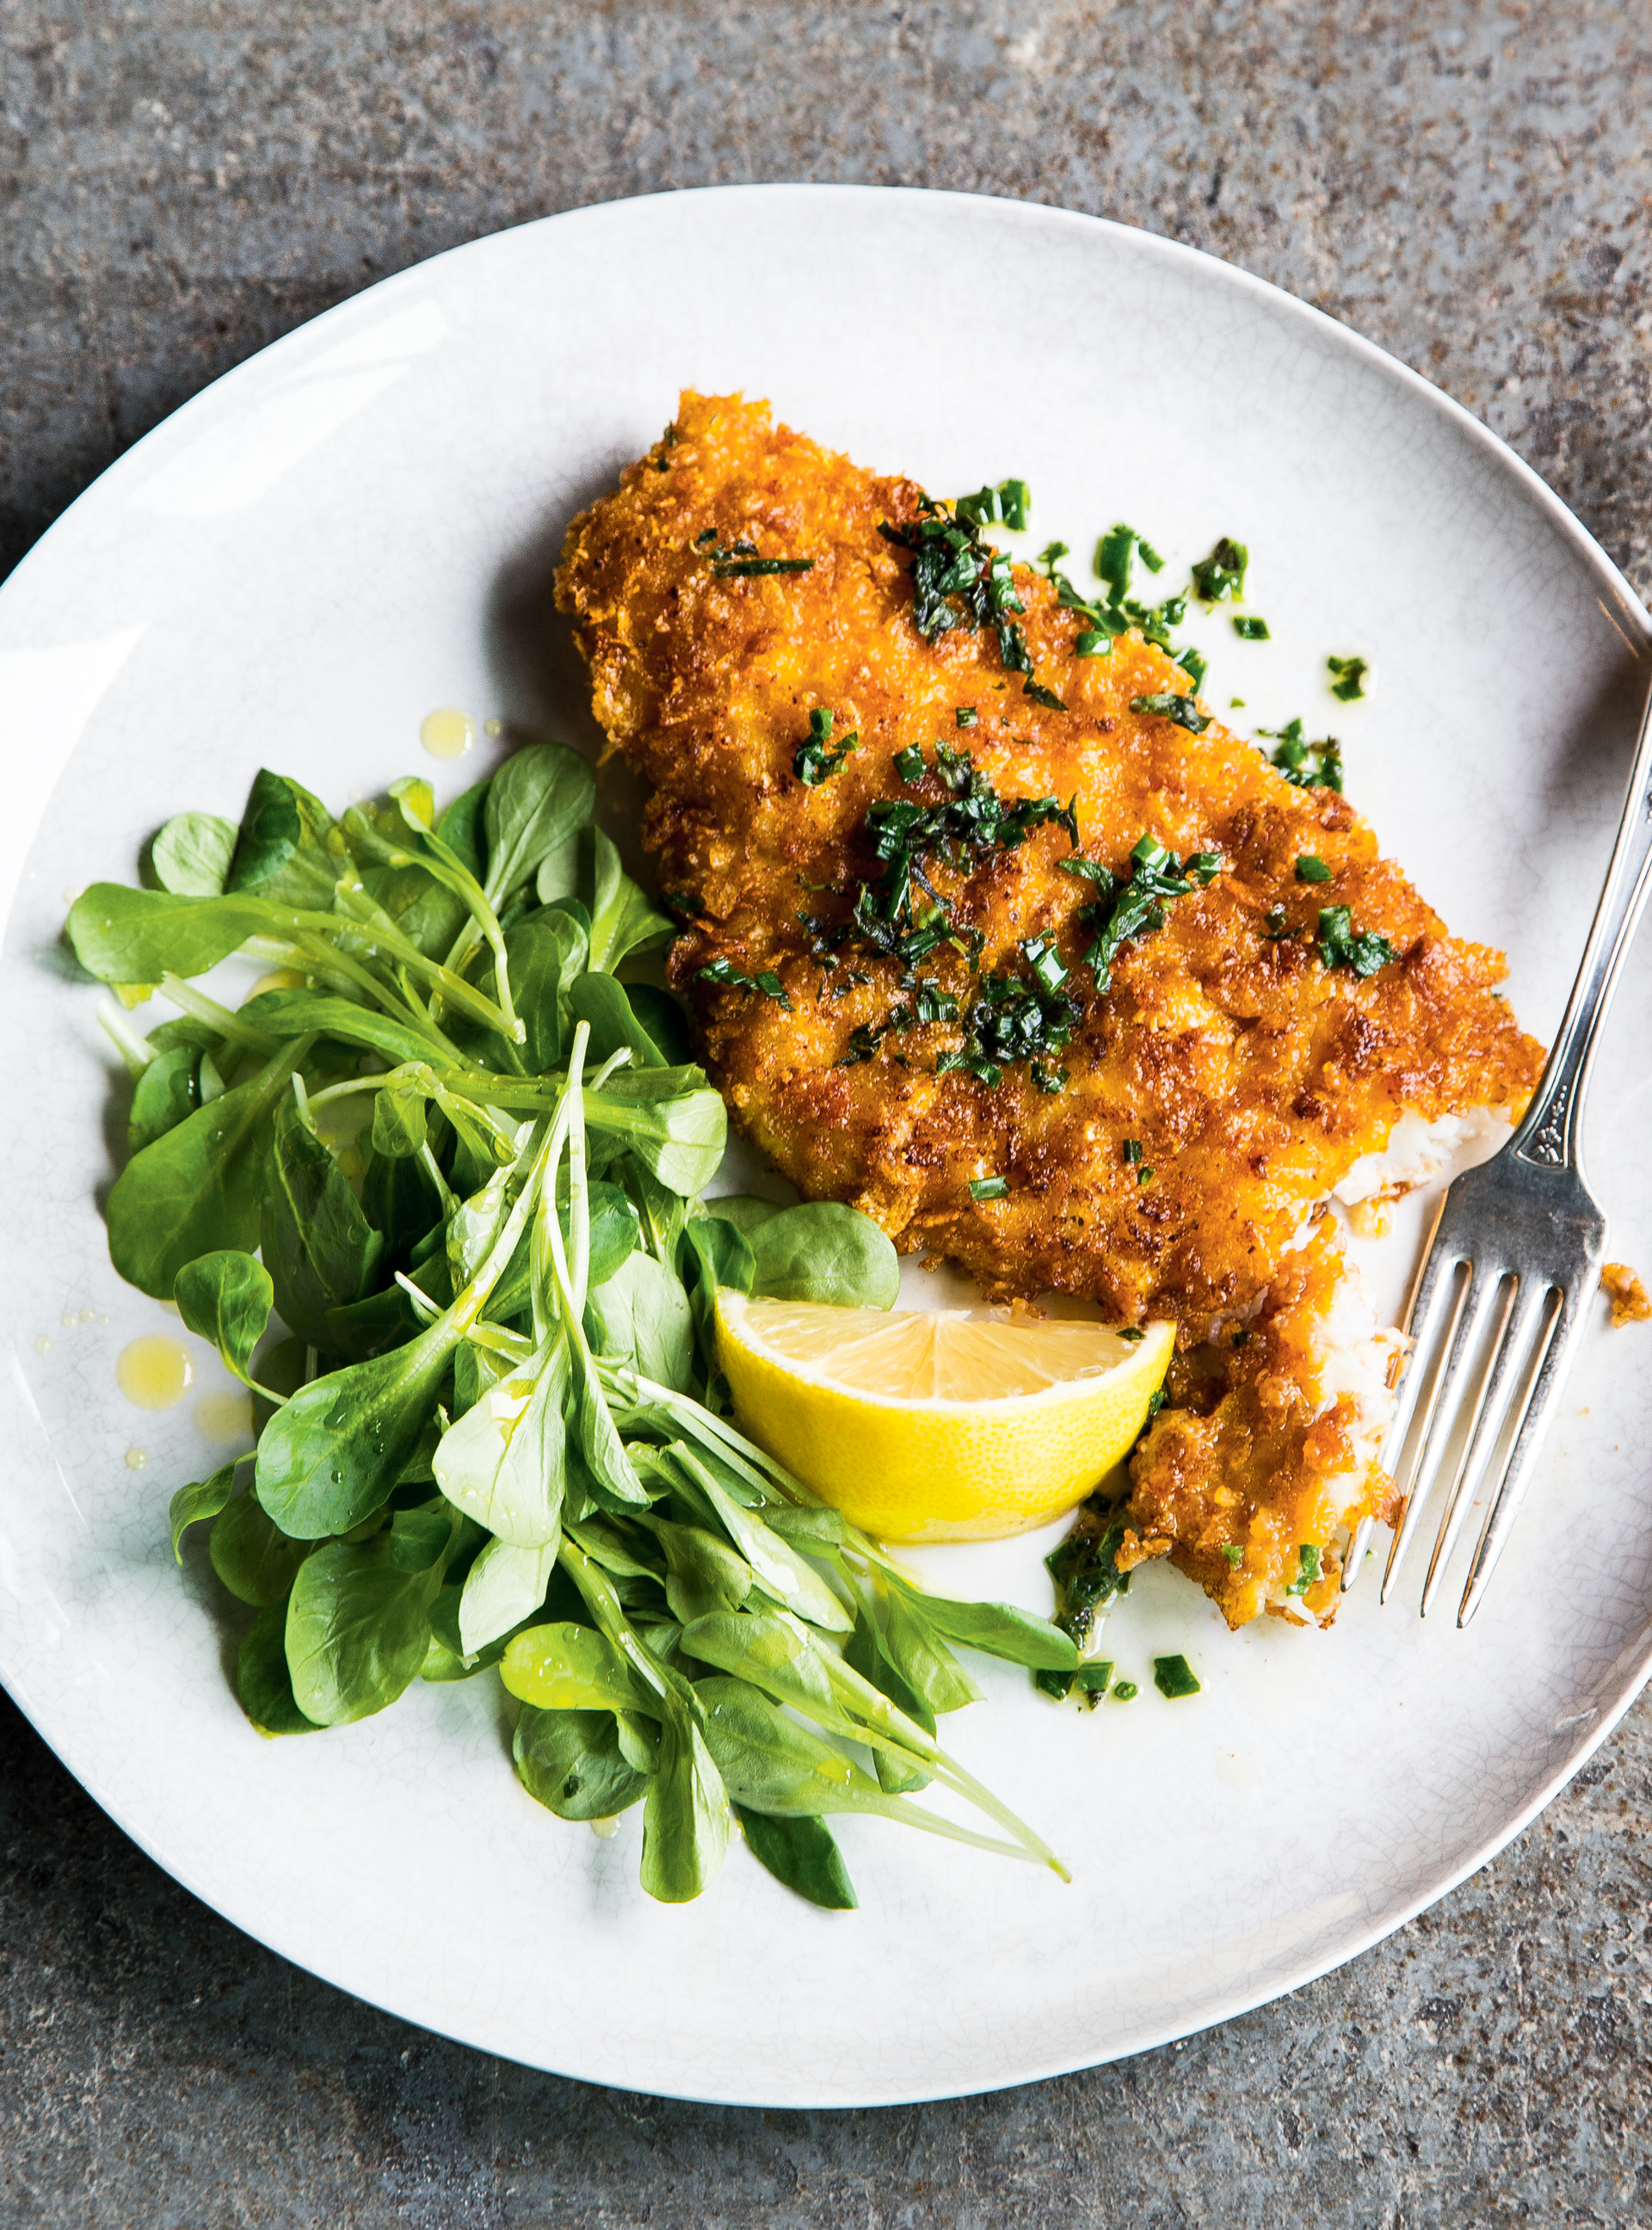 Cornflake-Crusted Fish with Herb Butter